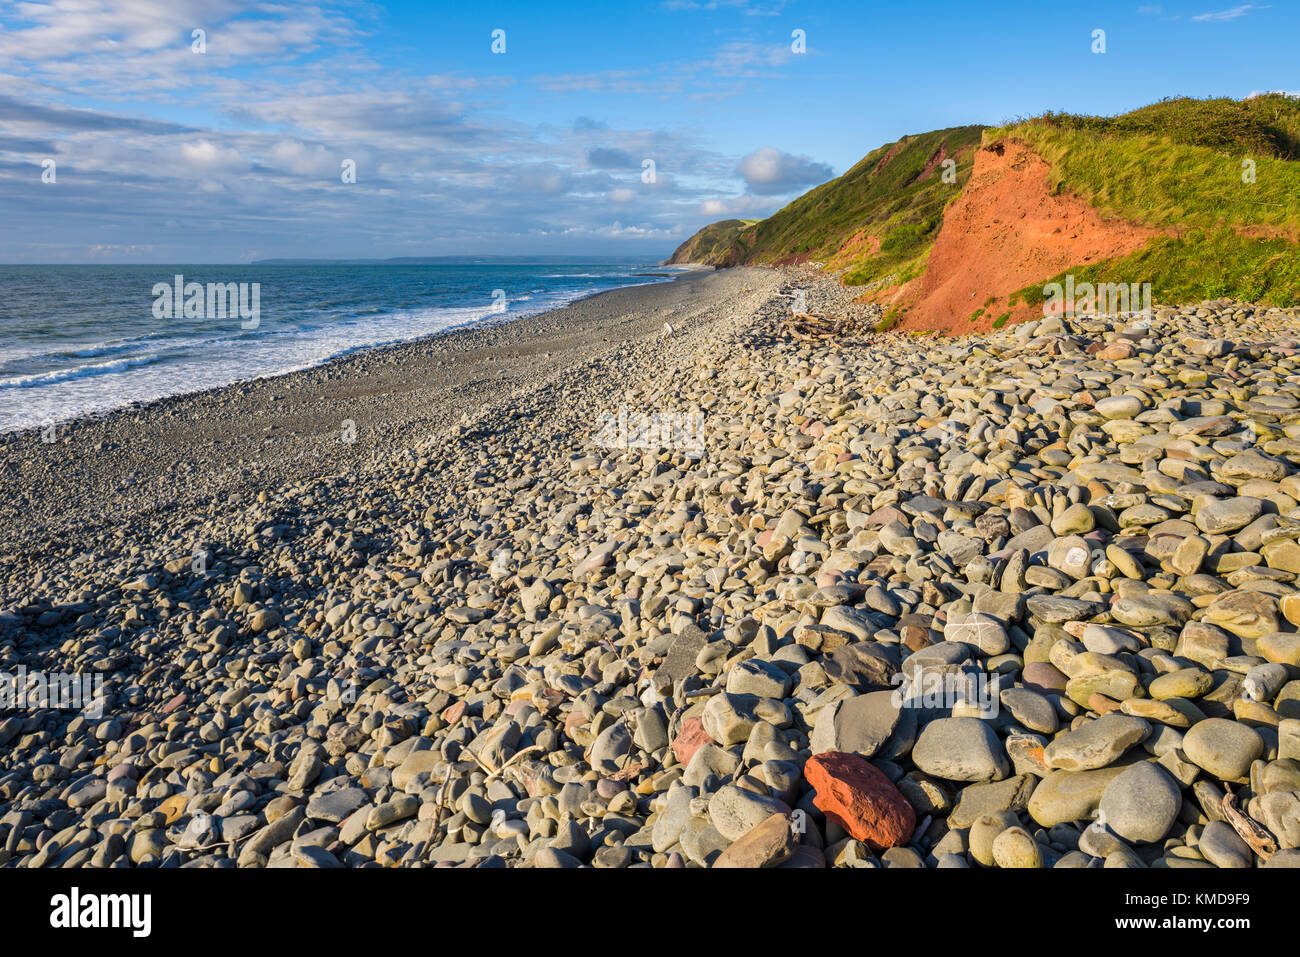 The beach at Peppercombe on the North Devon Heritage Coast, England. Stock Photo